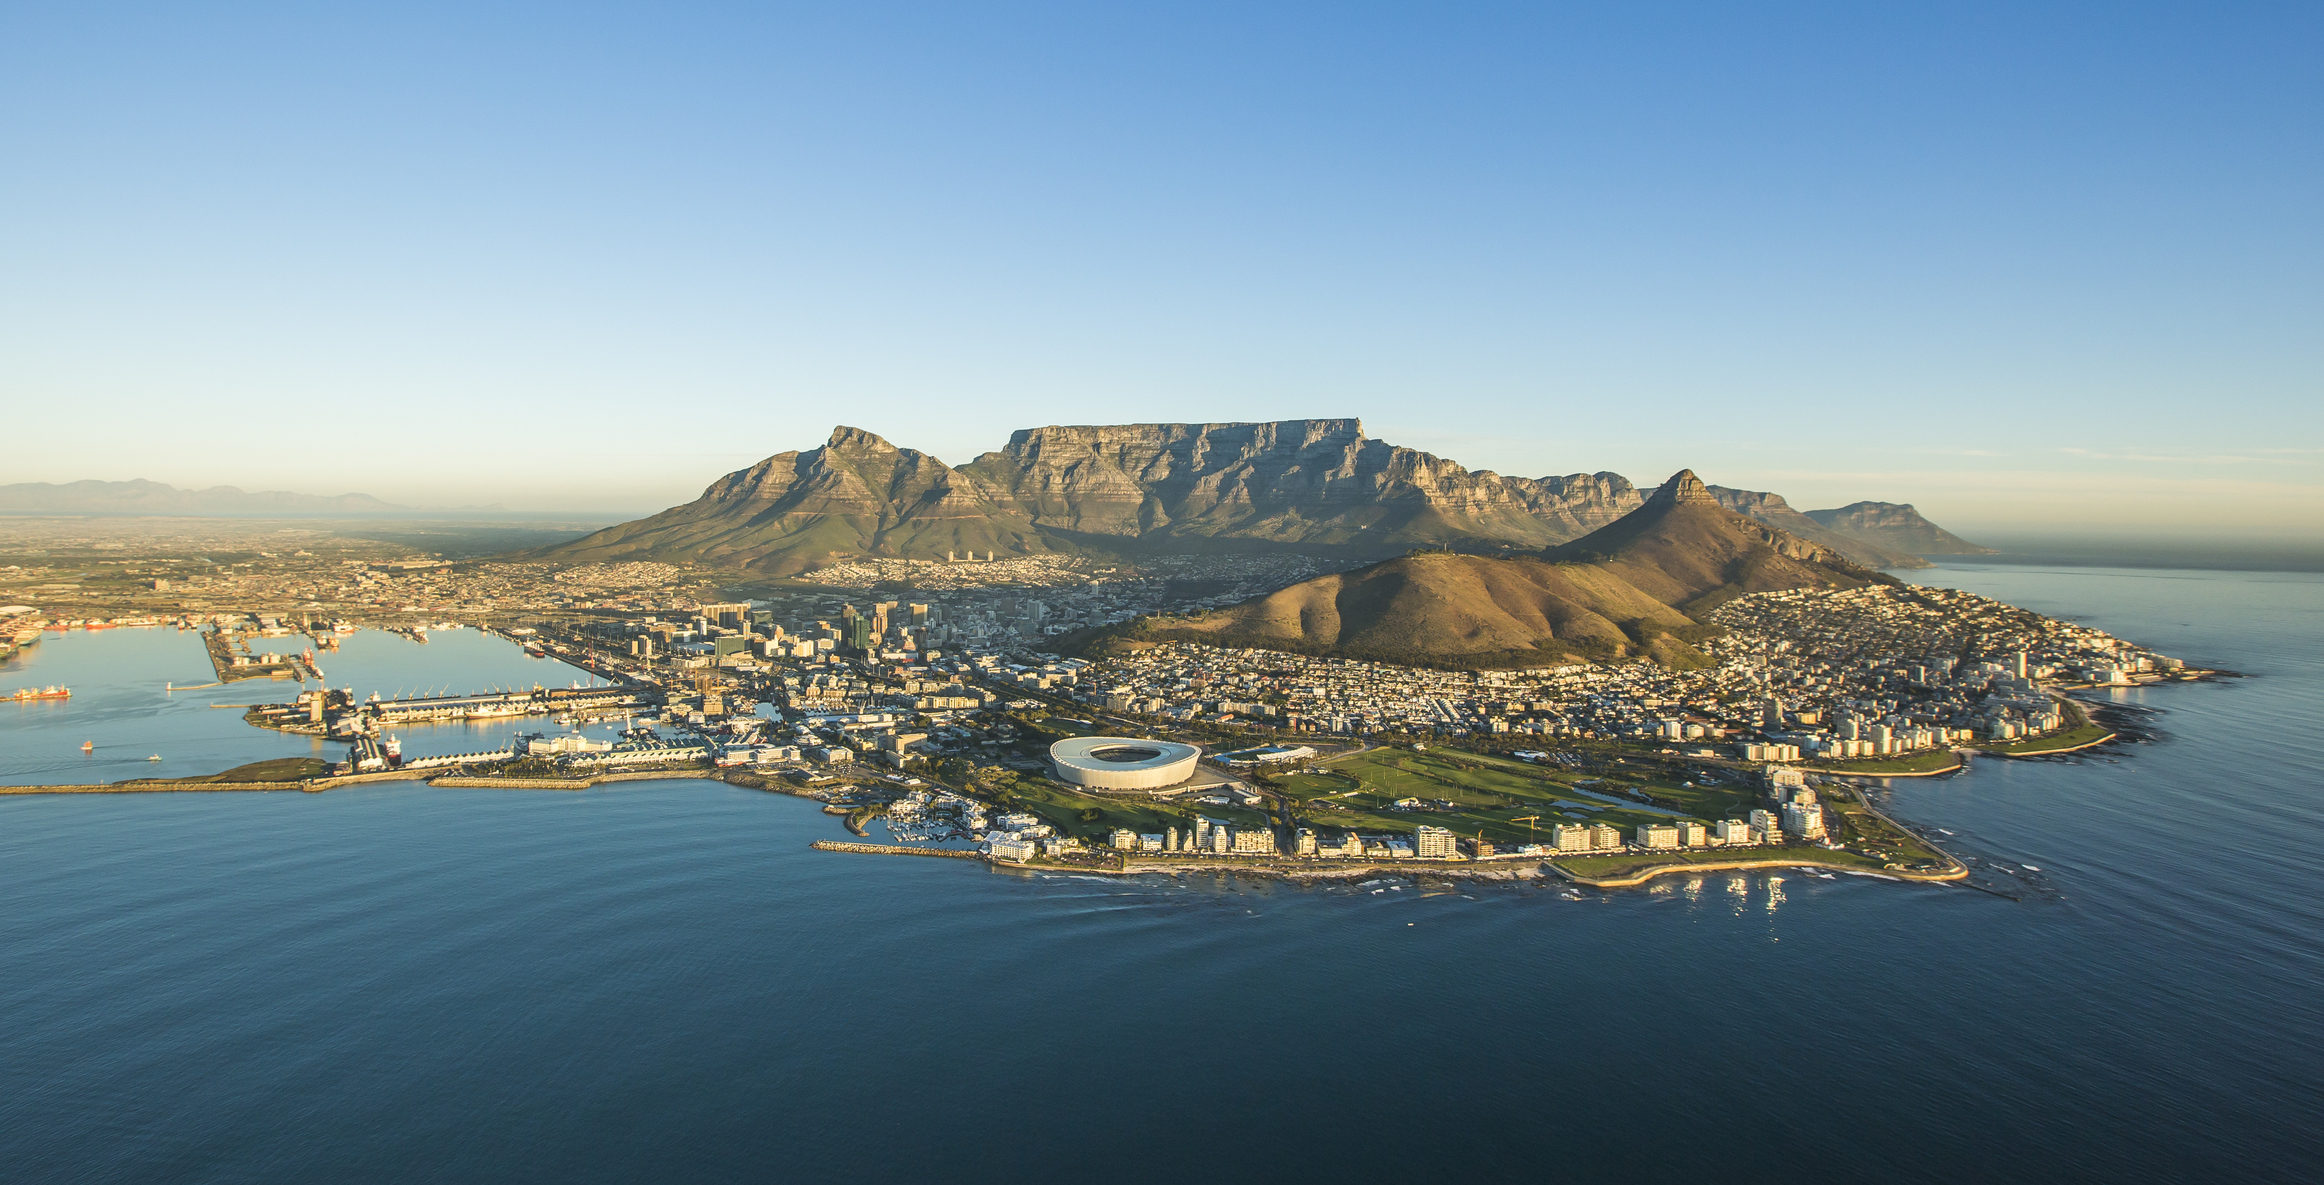 Discover remarkable South African sights like this aerial view of Cape Town when you take a tailor-made holiday with Alfred&.